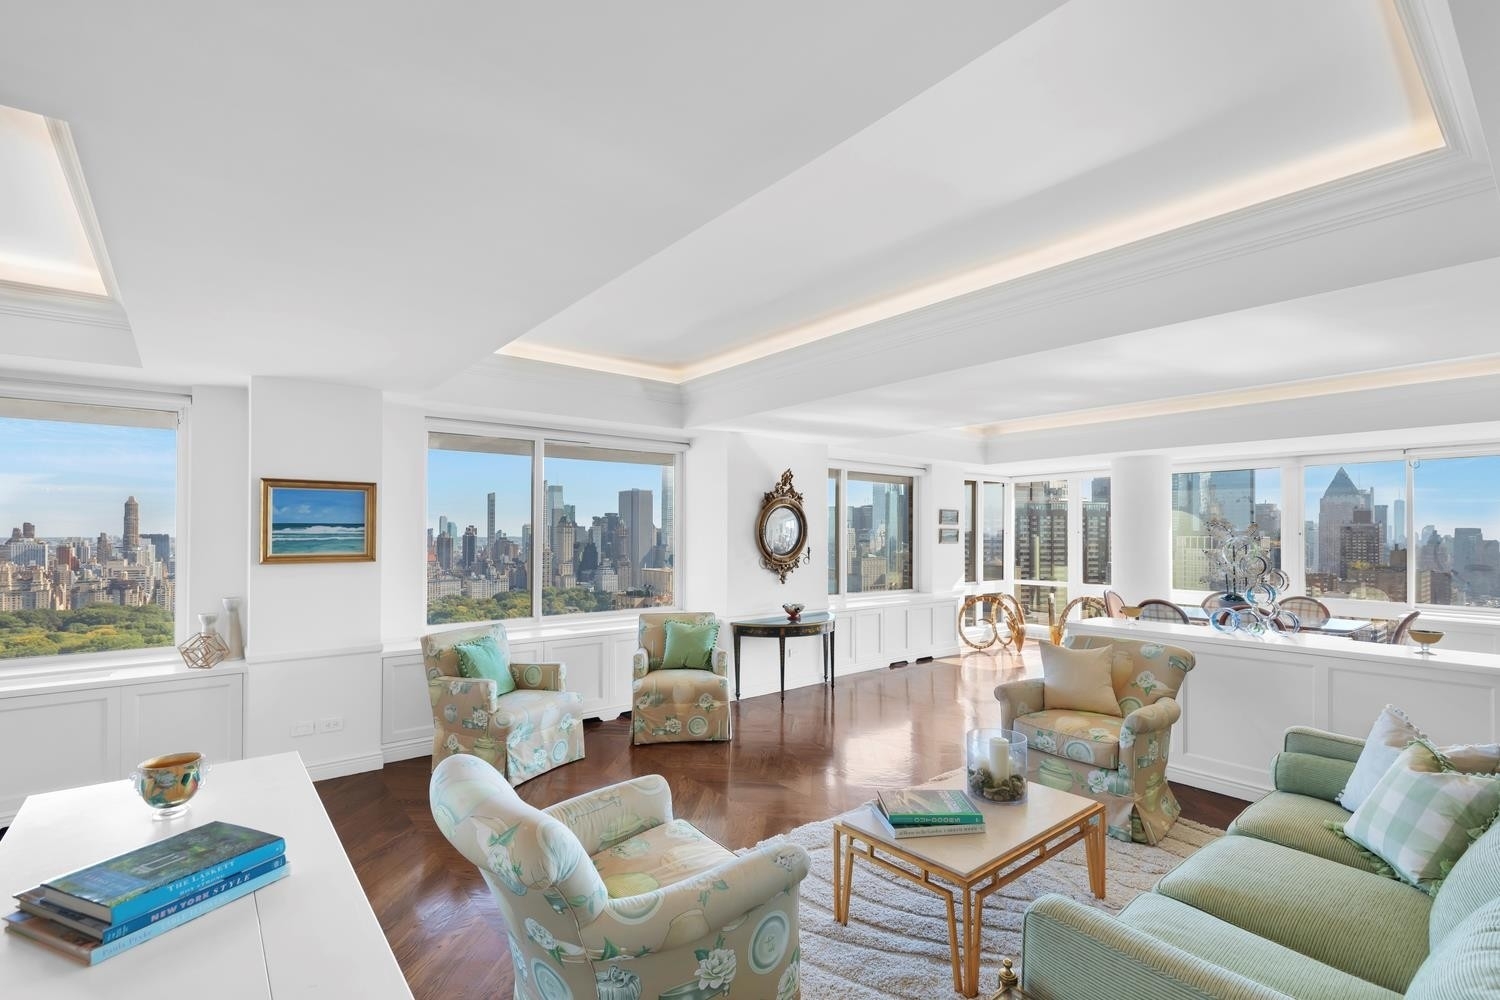 Property at The Millennium Tower, 111 W 67TH ST, 43AB Lincoln Square, New York, New York 10023